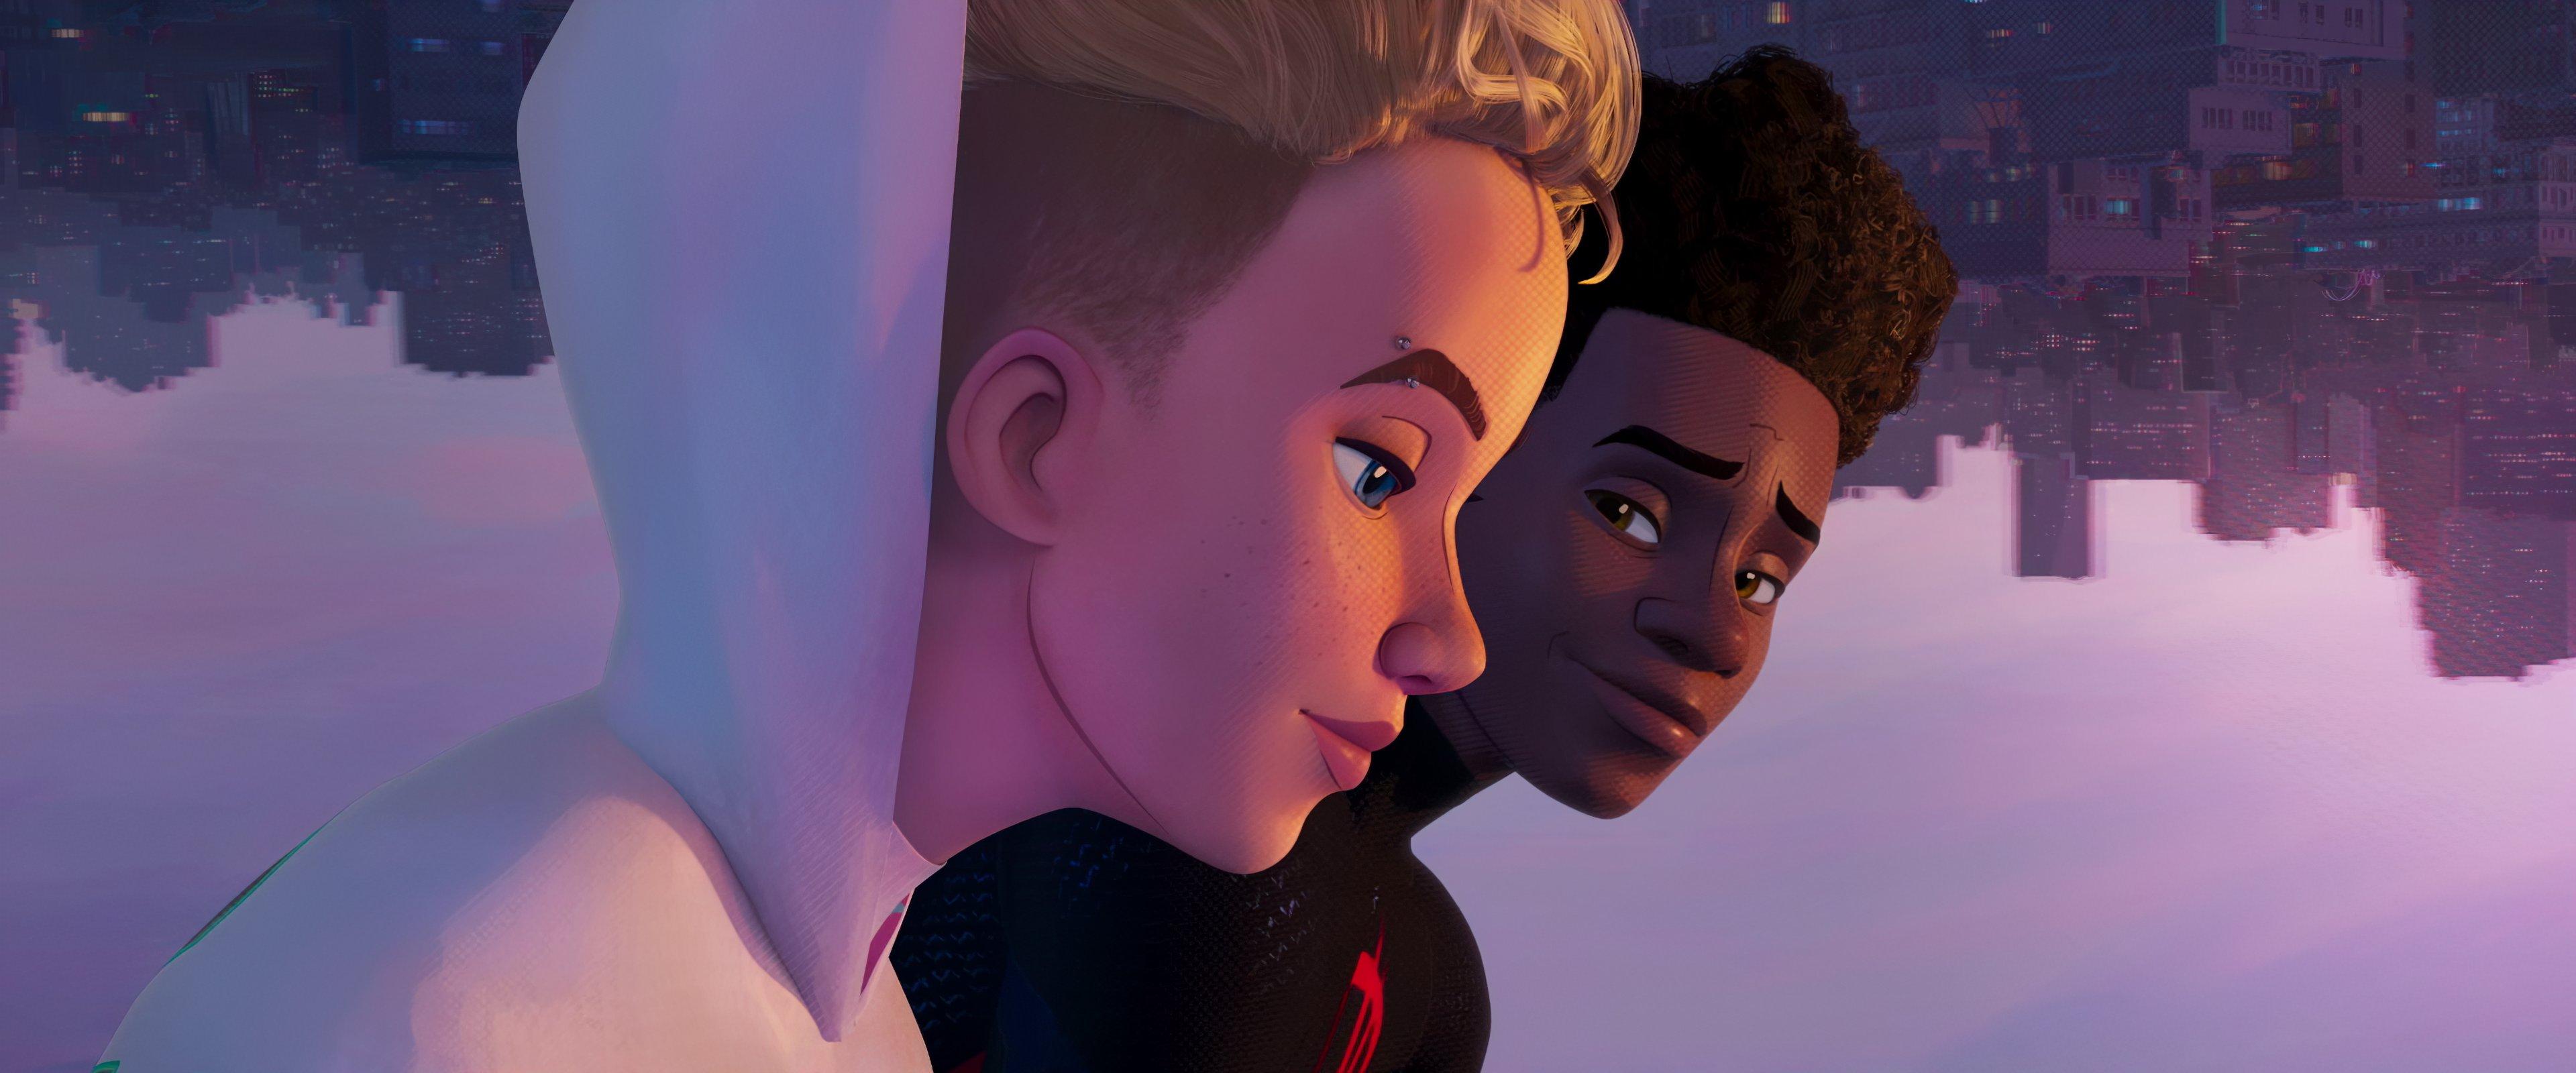 Gwen Stacy and Miles morales in Spider-Man: Across the Spider-Verse